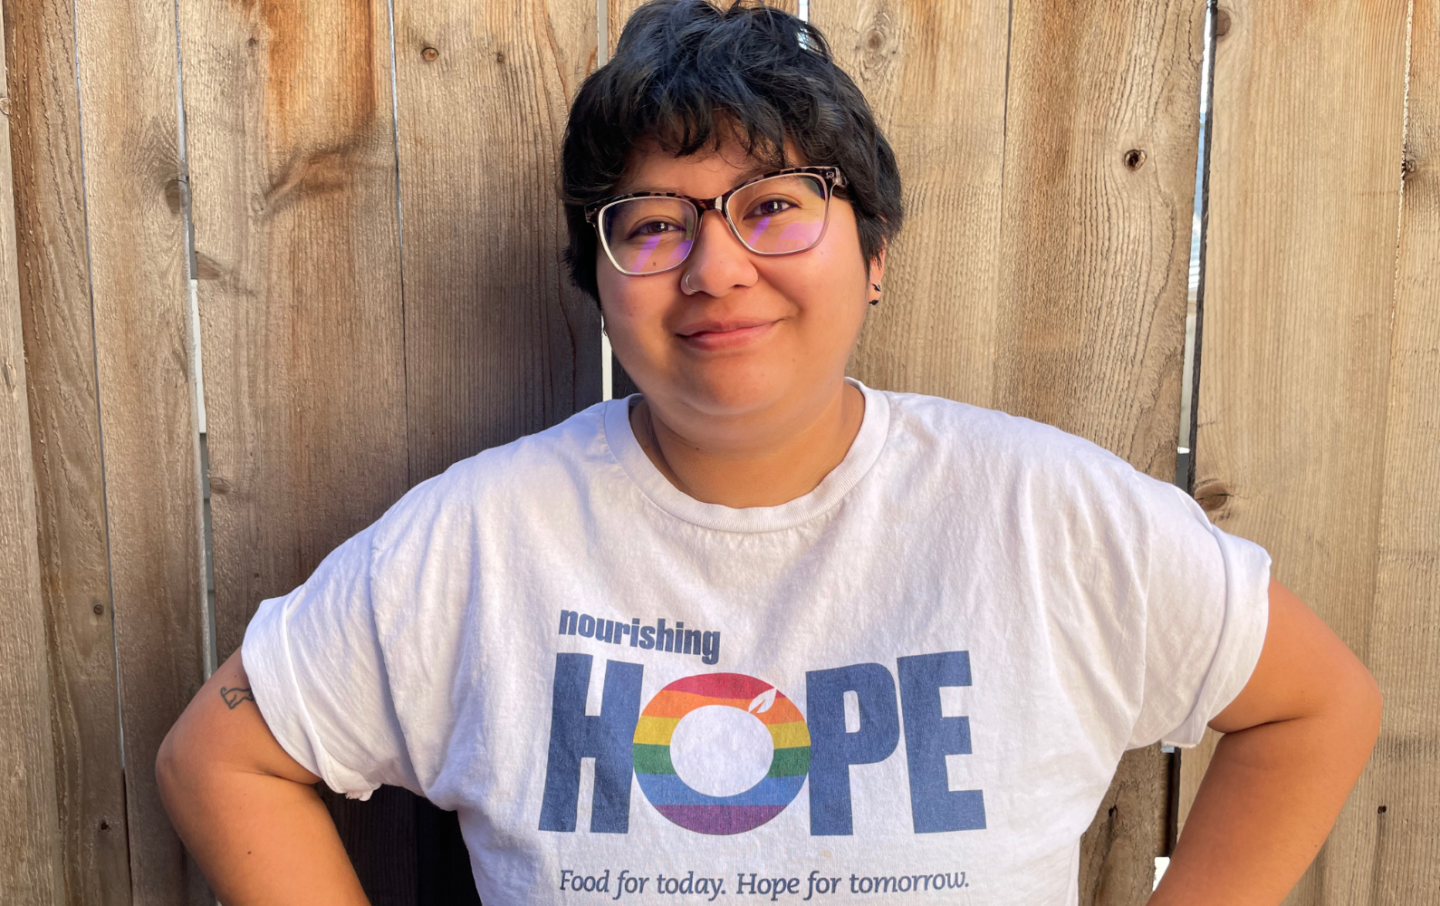 Marina Silva, one of Nourishing Hope's bilingual therapists, started counseling groups for LGBTQ+ people. 